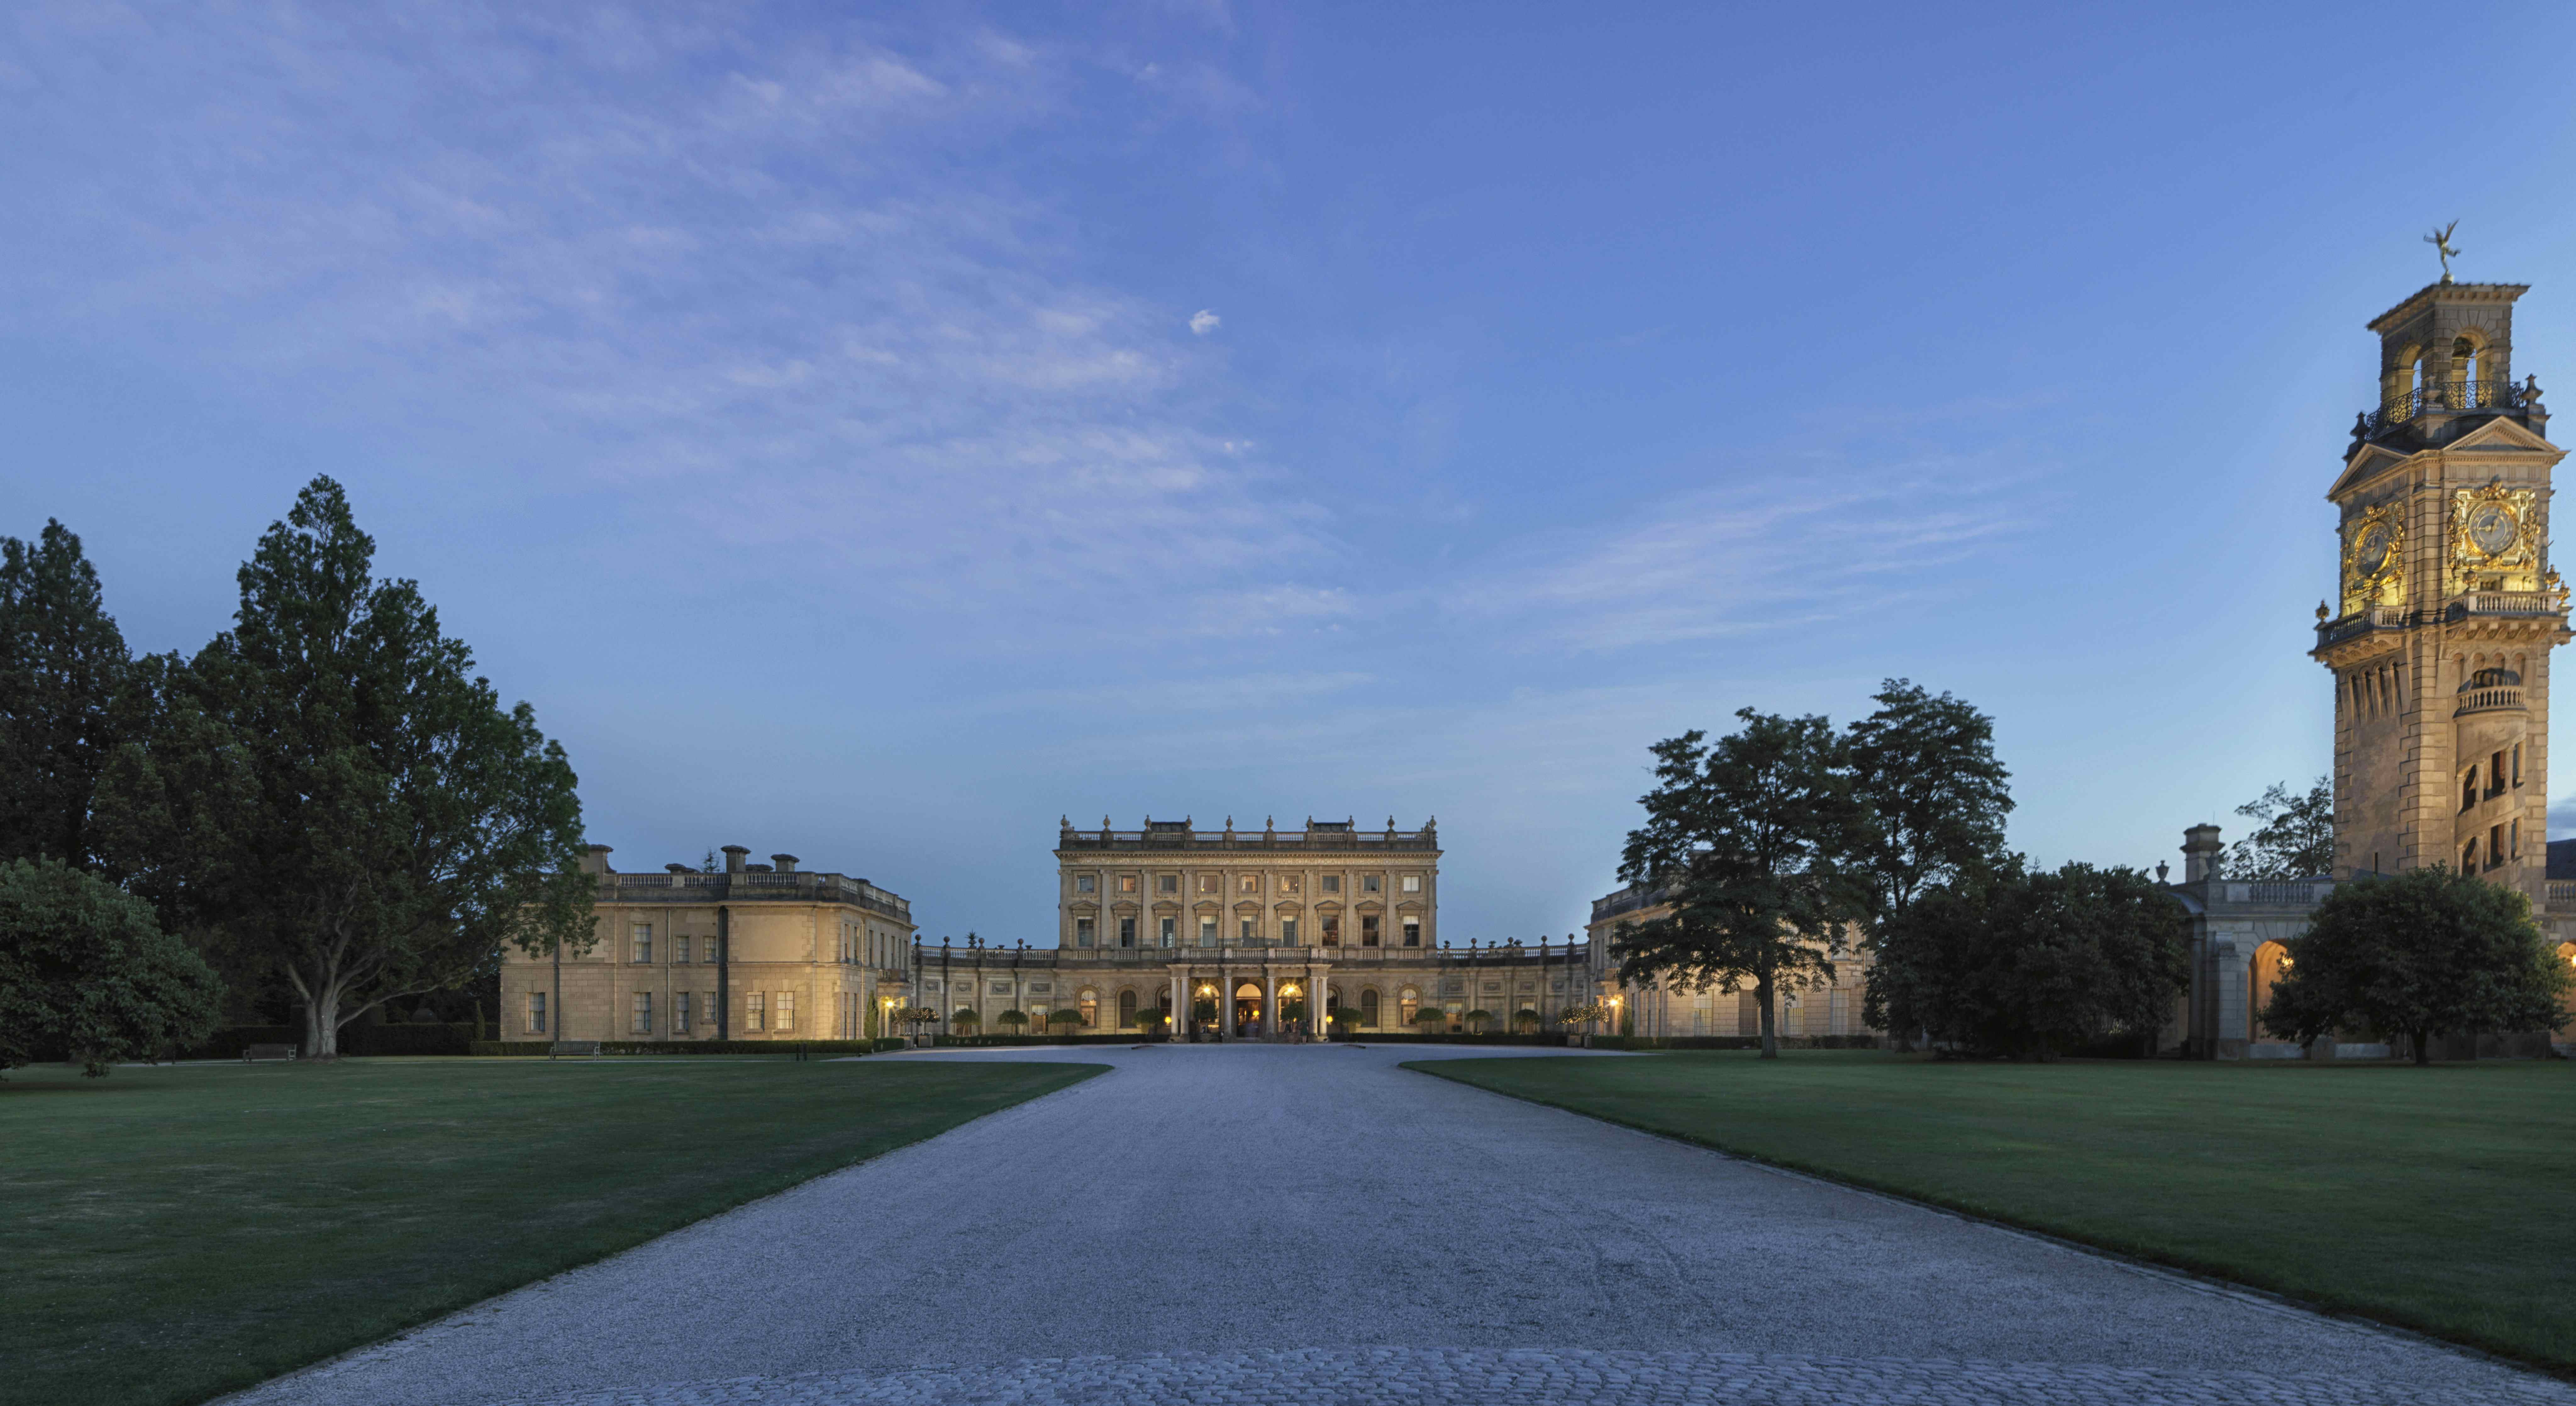 Exclusive Use, Cliveden House